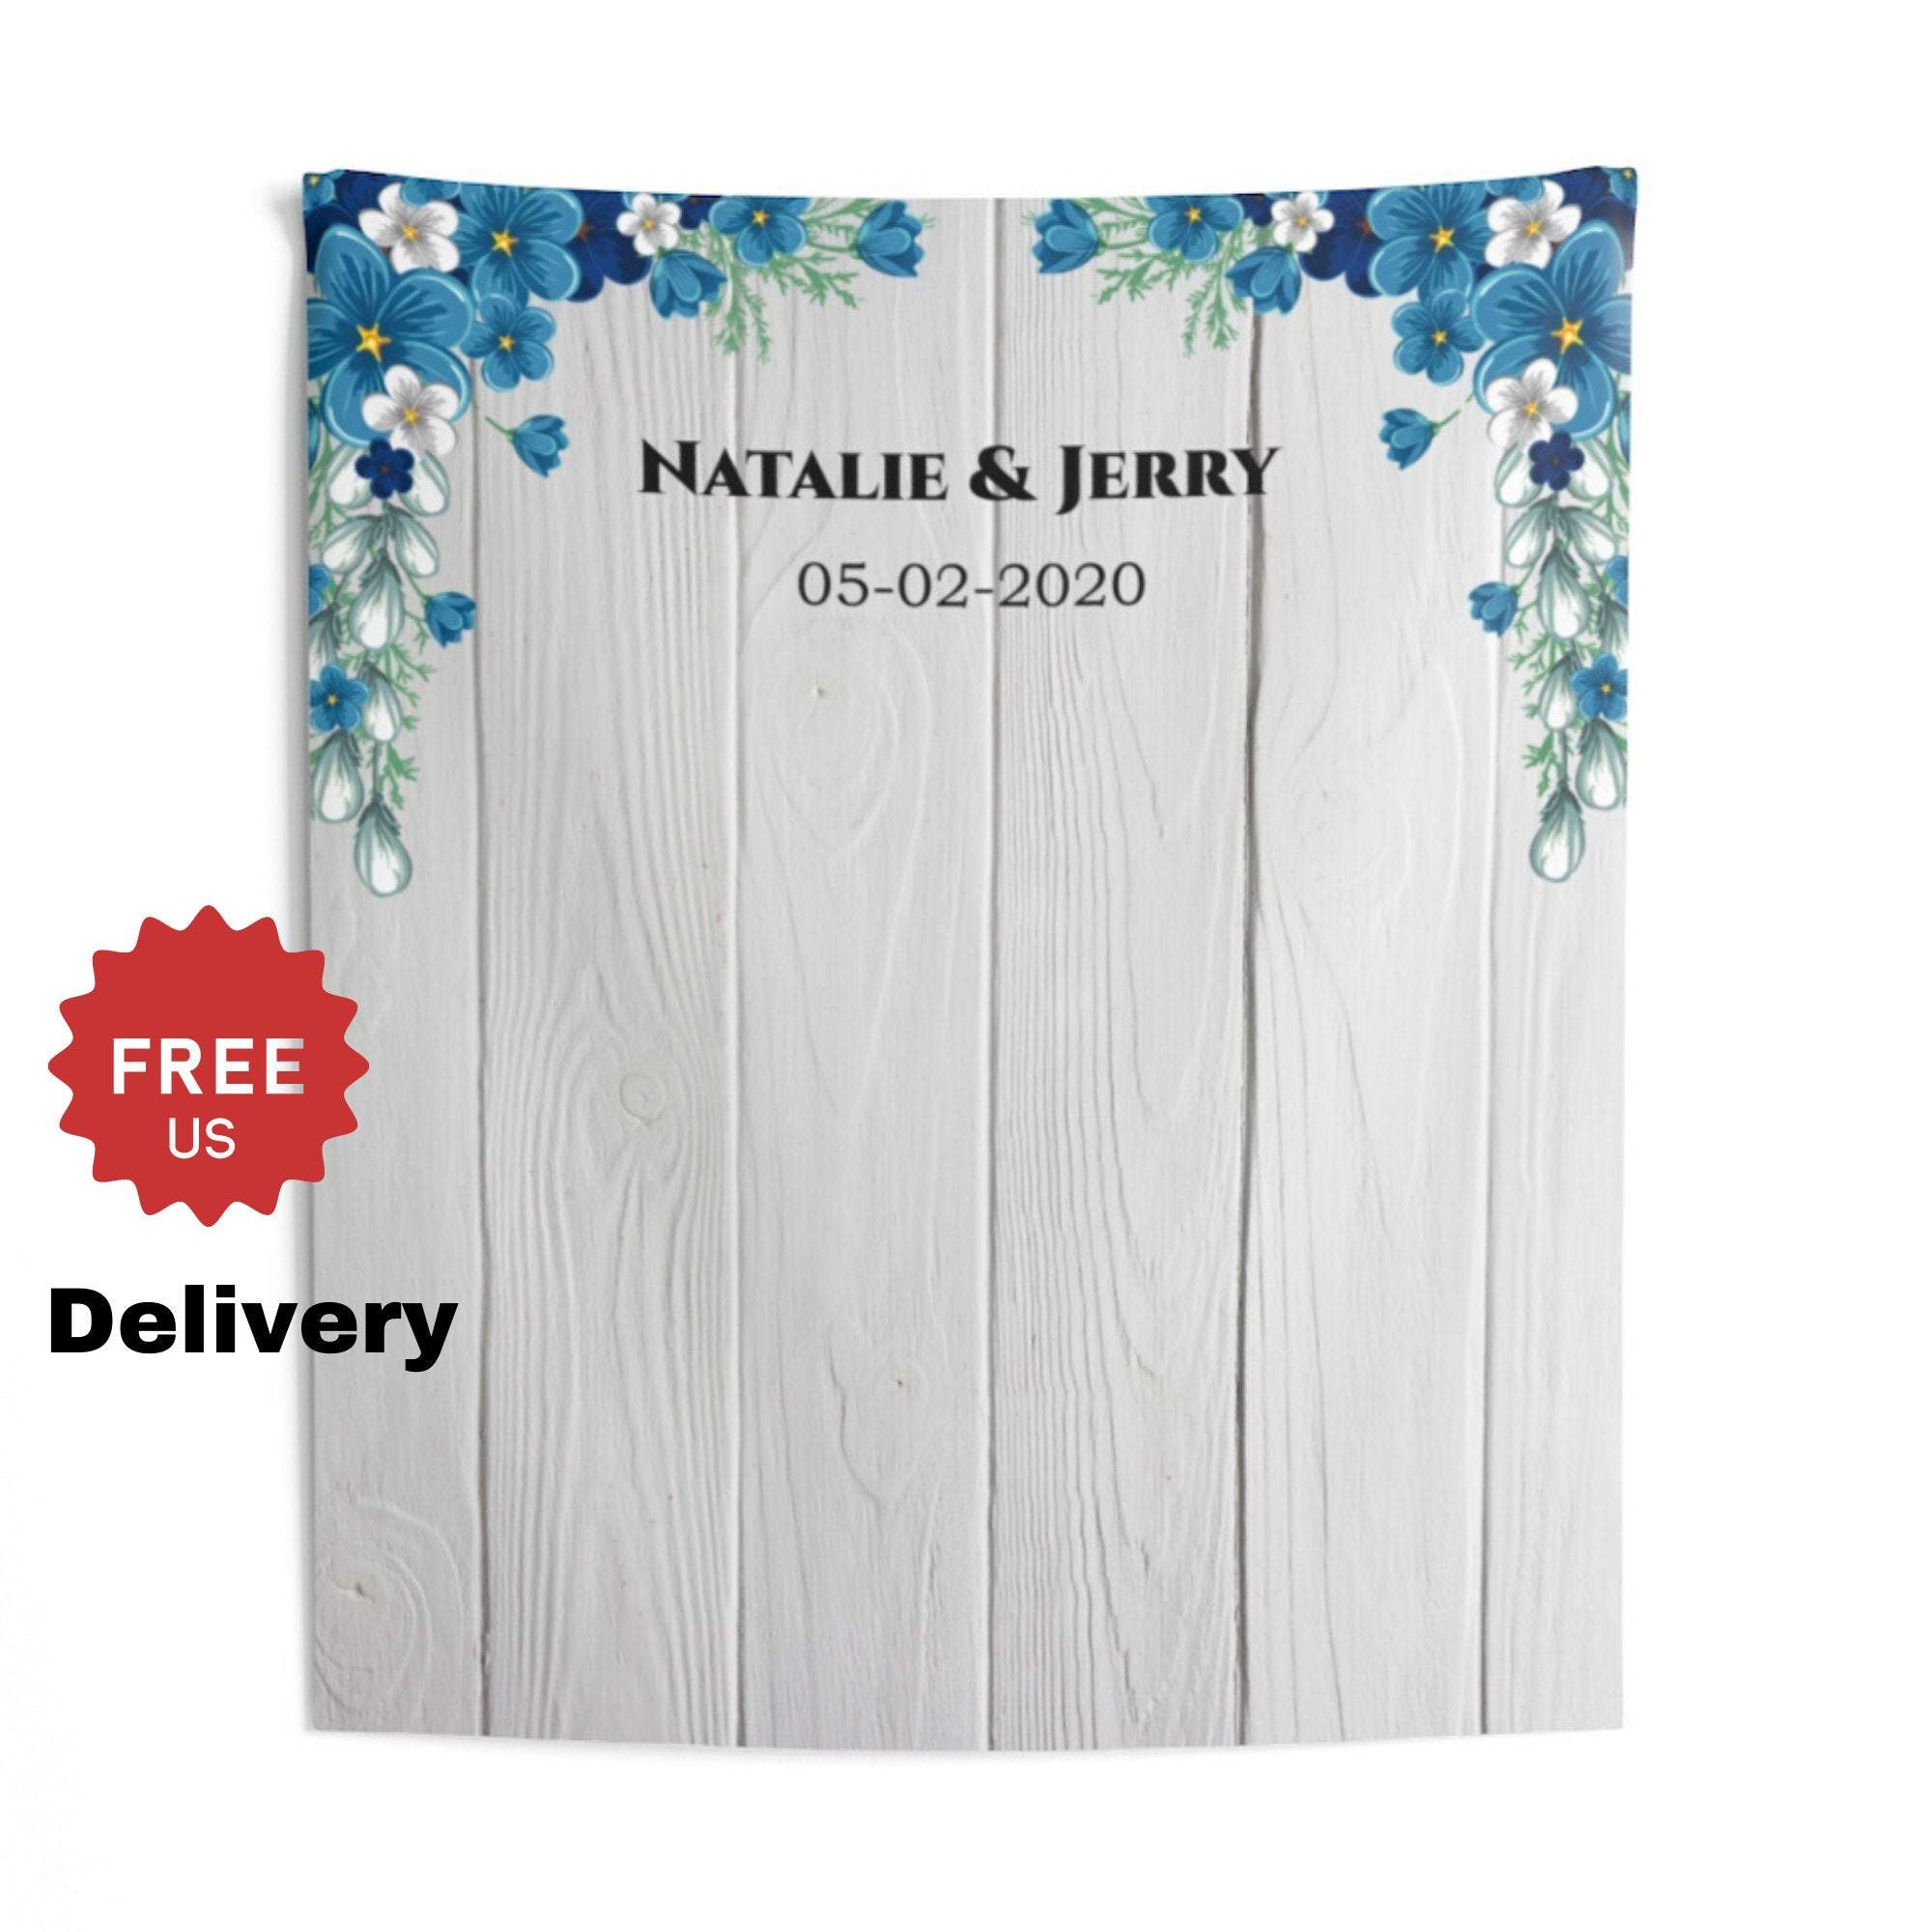 Personalized Blue Floral Wedding Backdrop/ Floral Backdrop / Rustic Blue Backdrop - Shop Now iJay Backdrops 